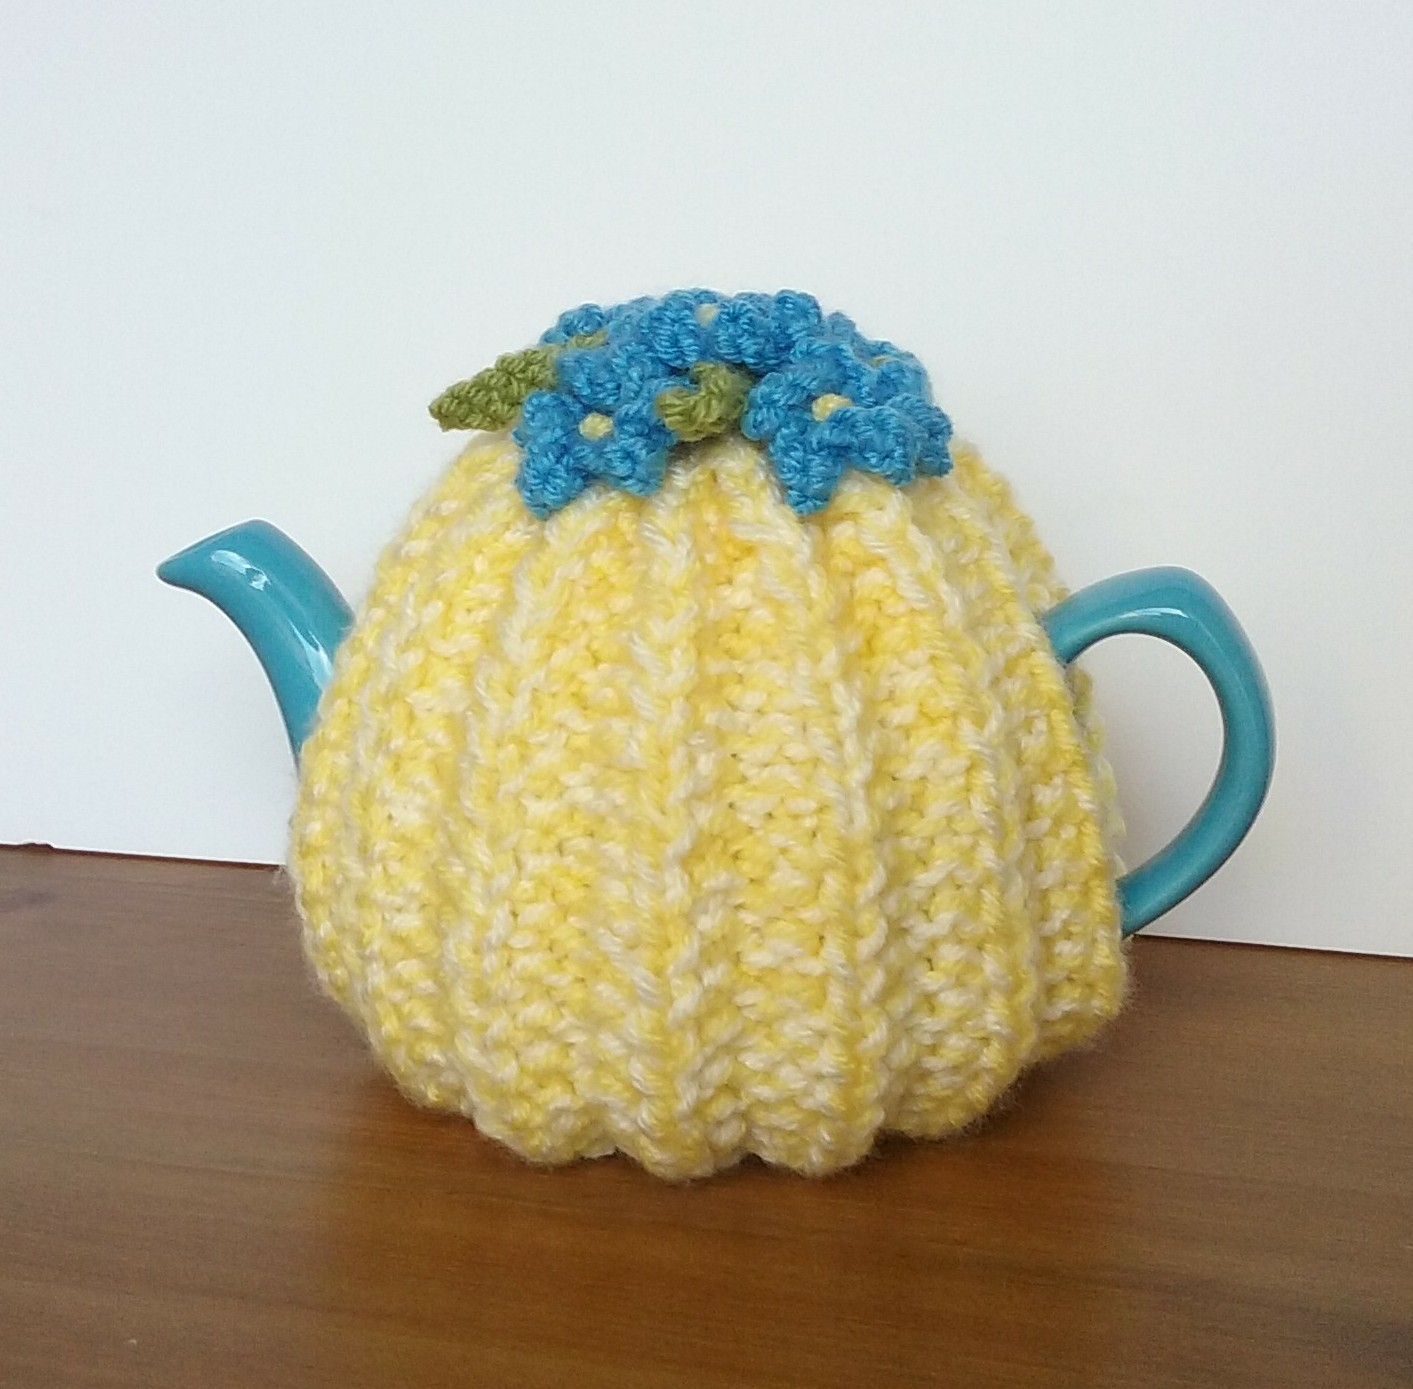 Knitted Tea Cosy Pattern Easy Linmary Knits Rib One Cup Tea Cosy